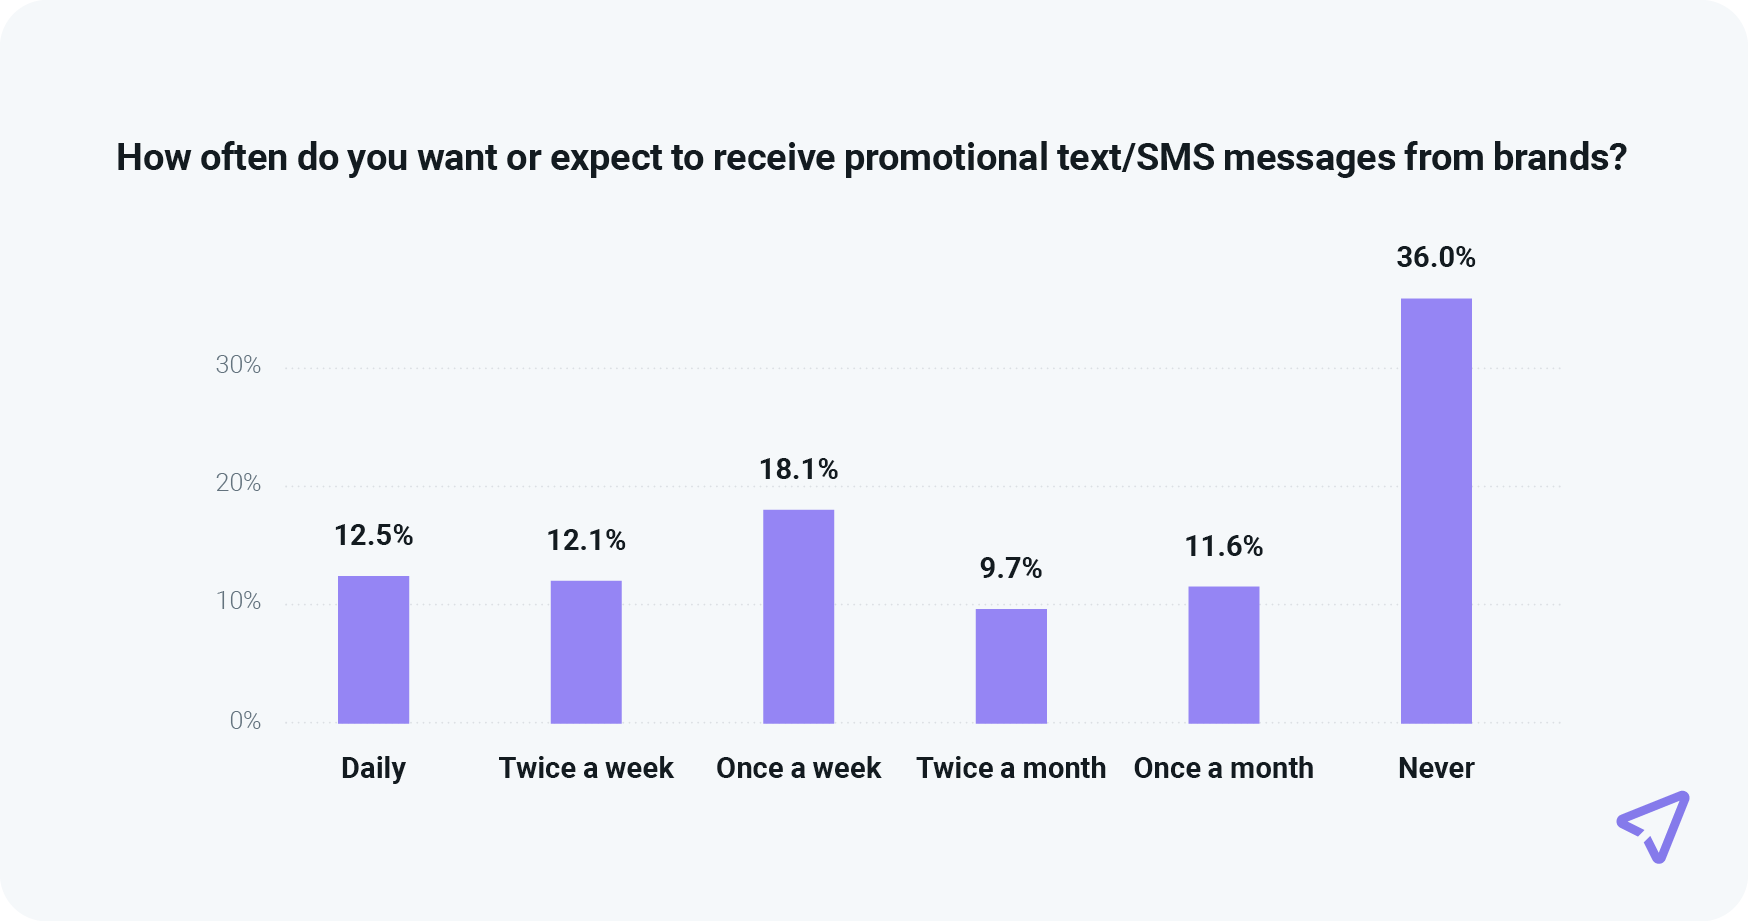 Chart shows expected frequency of SMS promotions